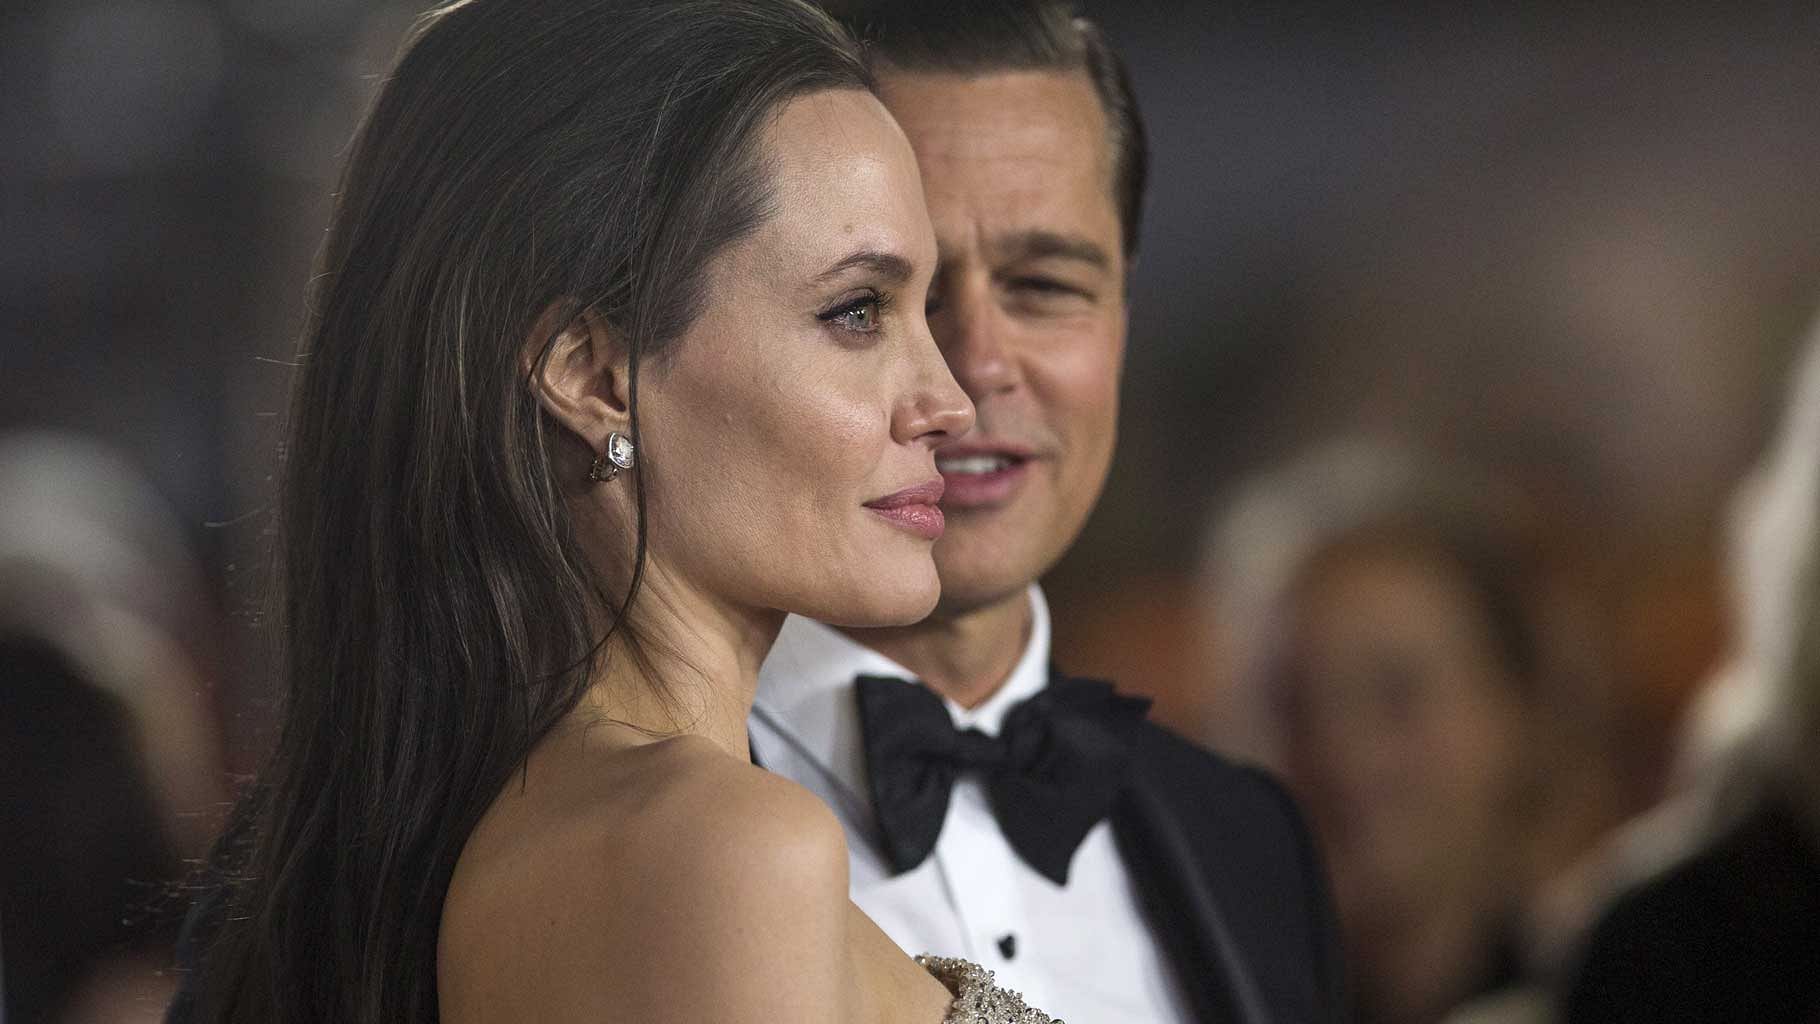 Angelina Jolie and Brad Pitt pose at the premiere of “By the Sea” during the opening night of AFI FEST 2015 in Hollywood, California (Photo: Reuters)